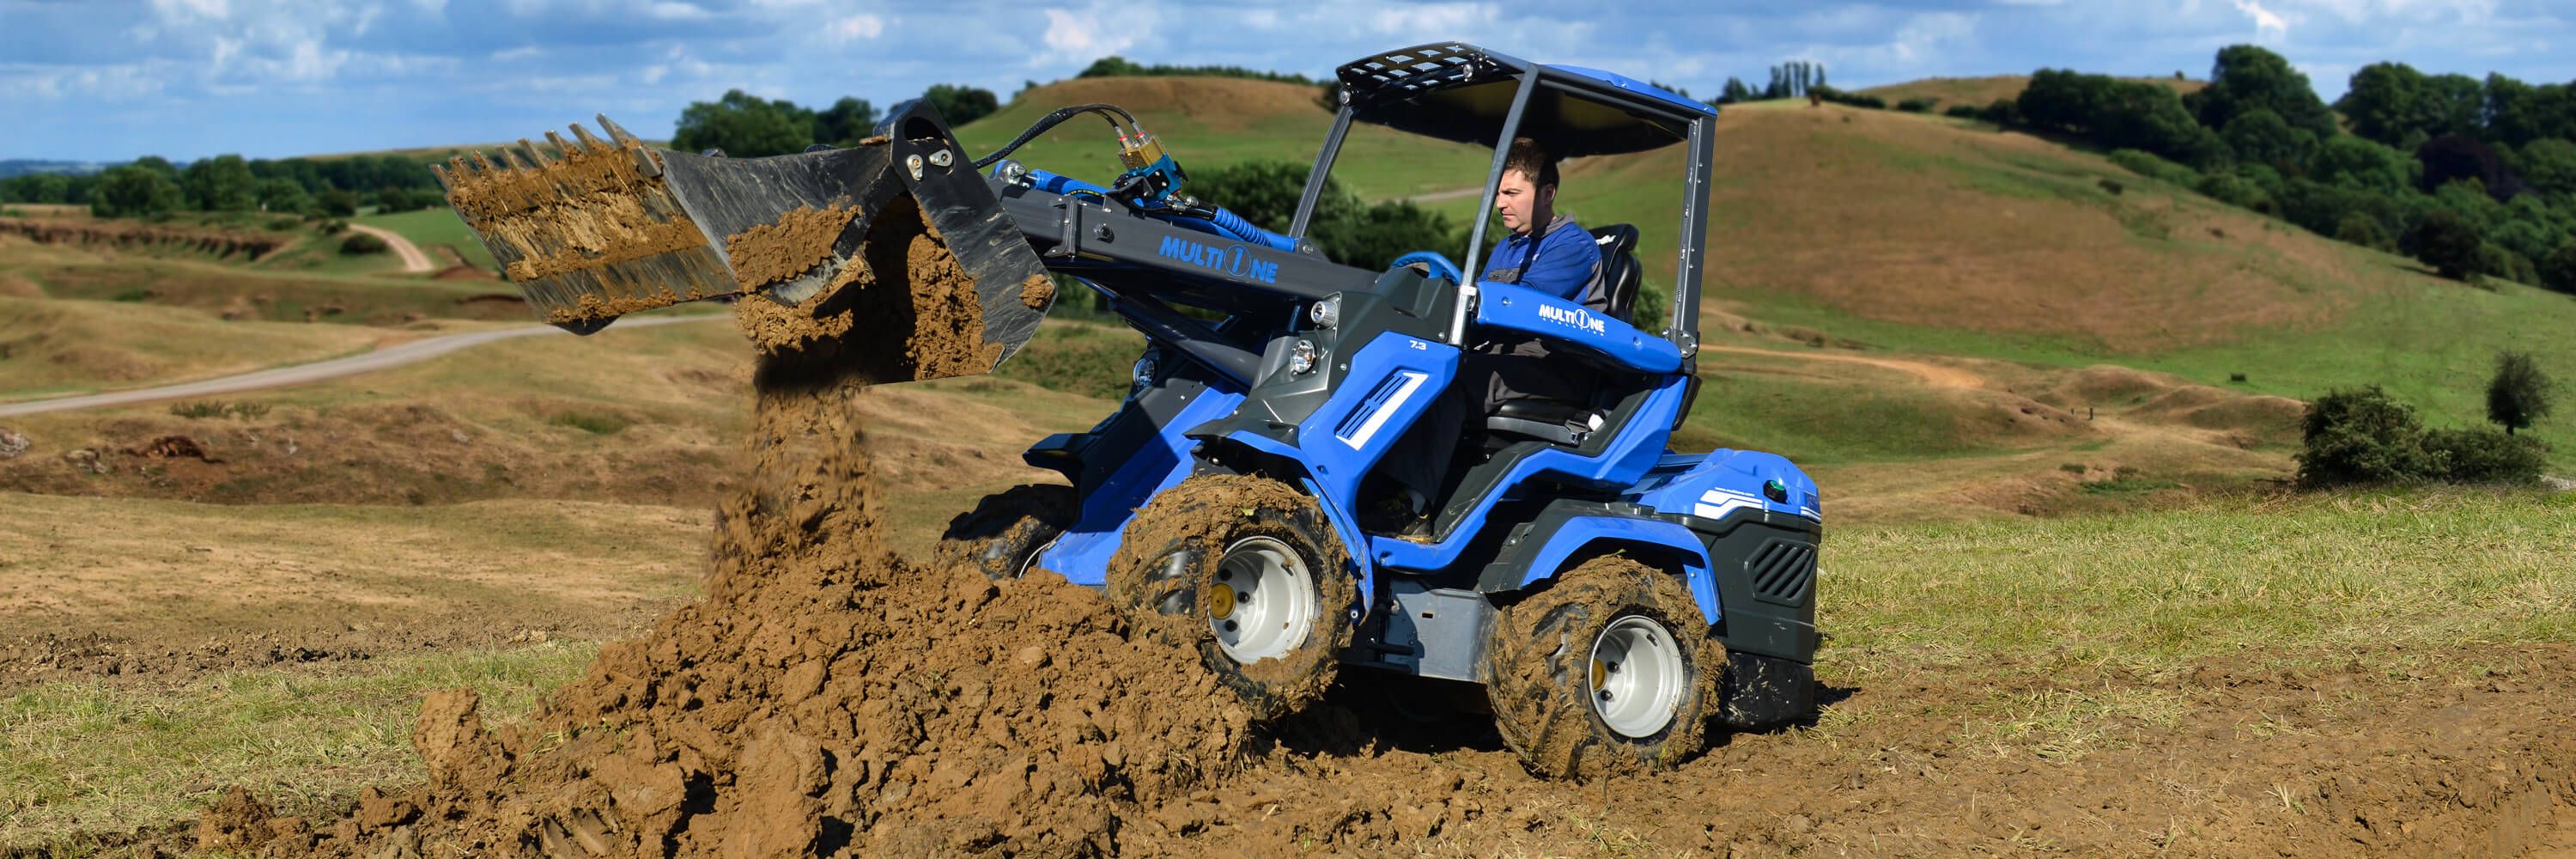 Articulated Compact Mini Wheel Loader